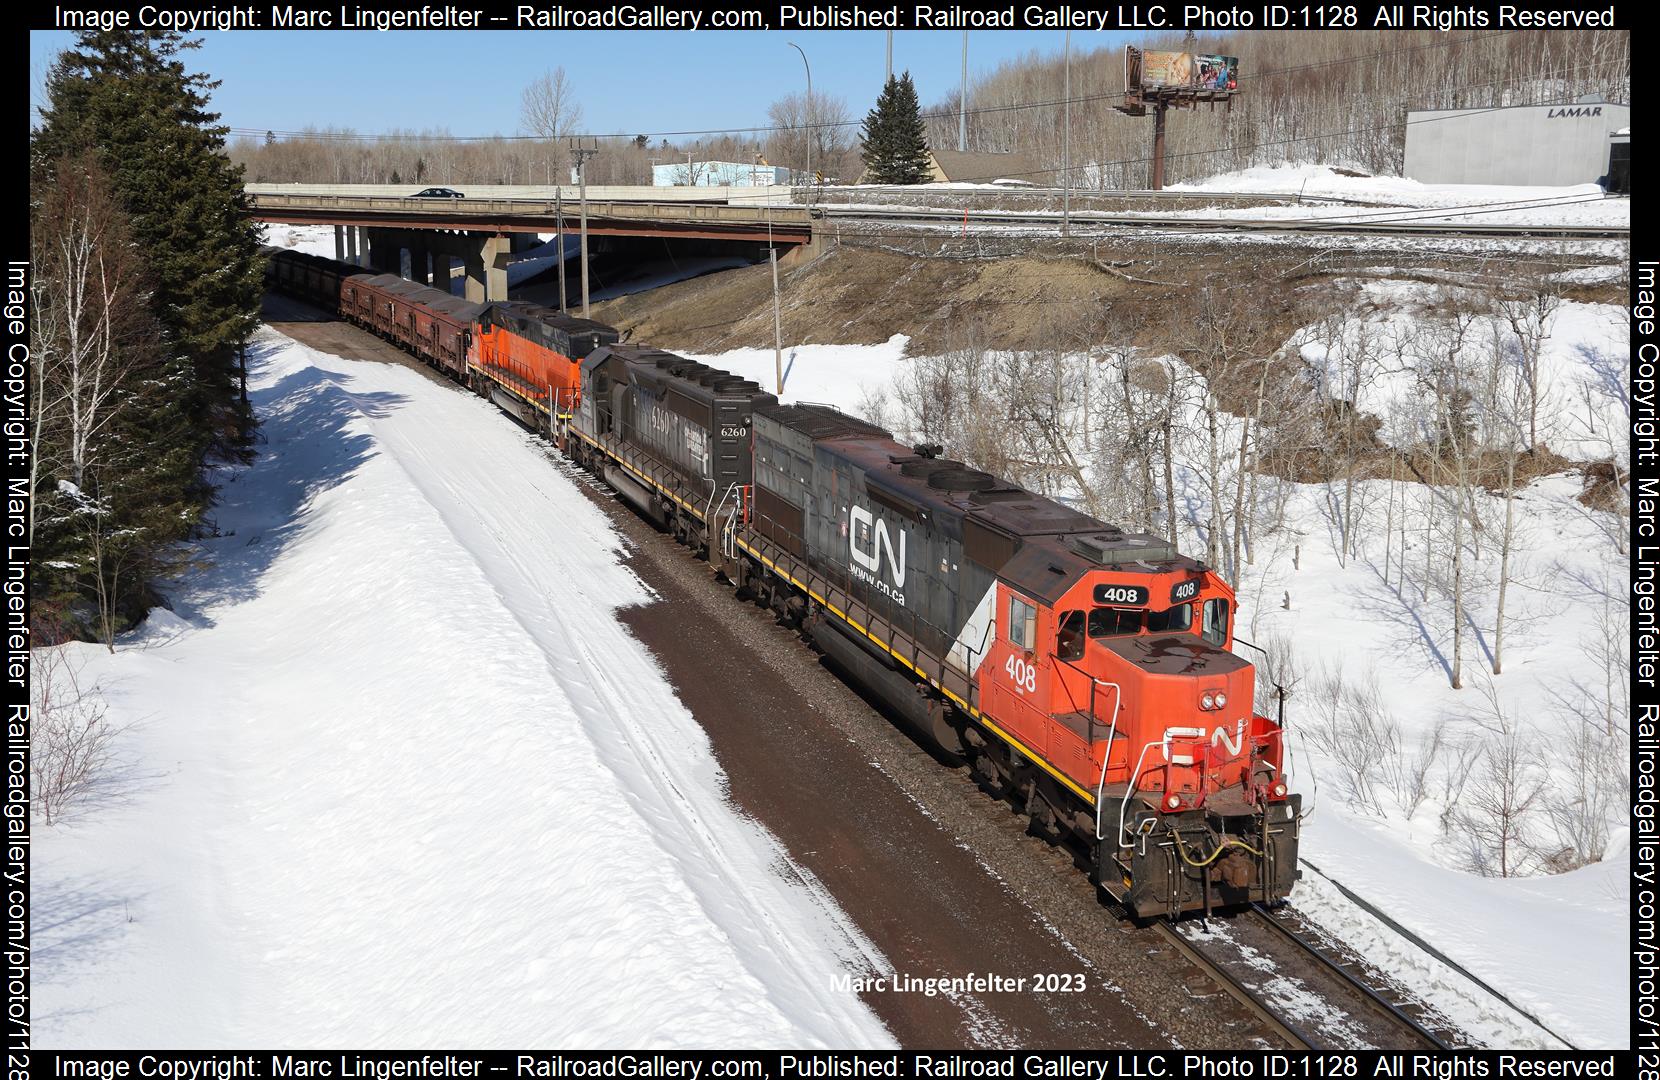 CN 408 is a class EMD SD40-3 and  is pictured in Proctor, Minnesota, USA.  This was taken along the CN Proctor Hill on the Canadian National Railway. Photo Copyright: Marc Lingenfelter uploaded to Railroad Gallery on 06/09/2023. This photograph of CN 408 was taken on Wednesday, March 29, 2023. All Rights Reserved. 